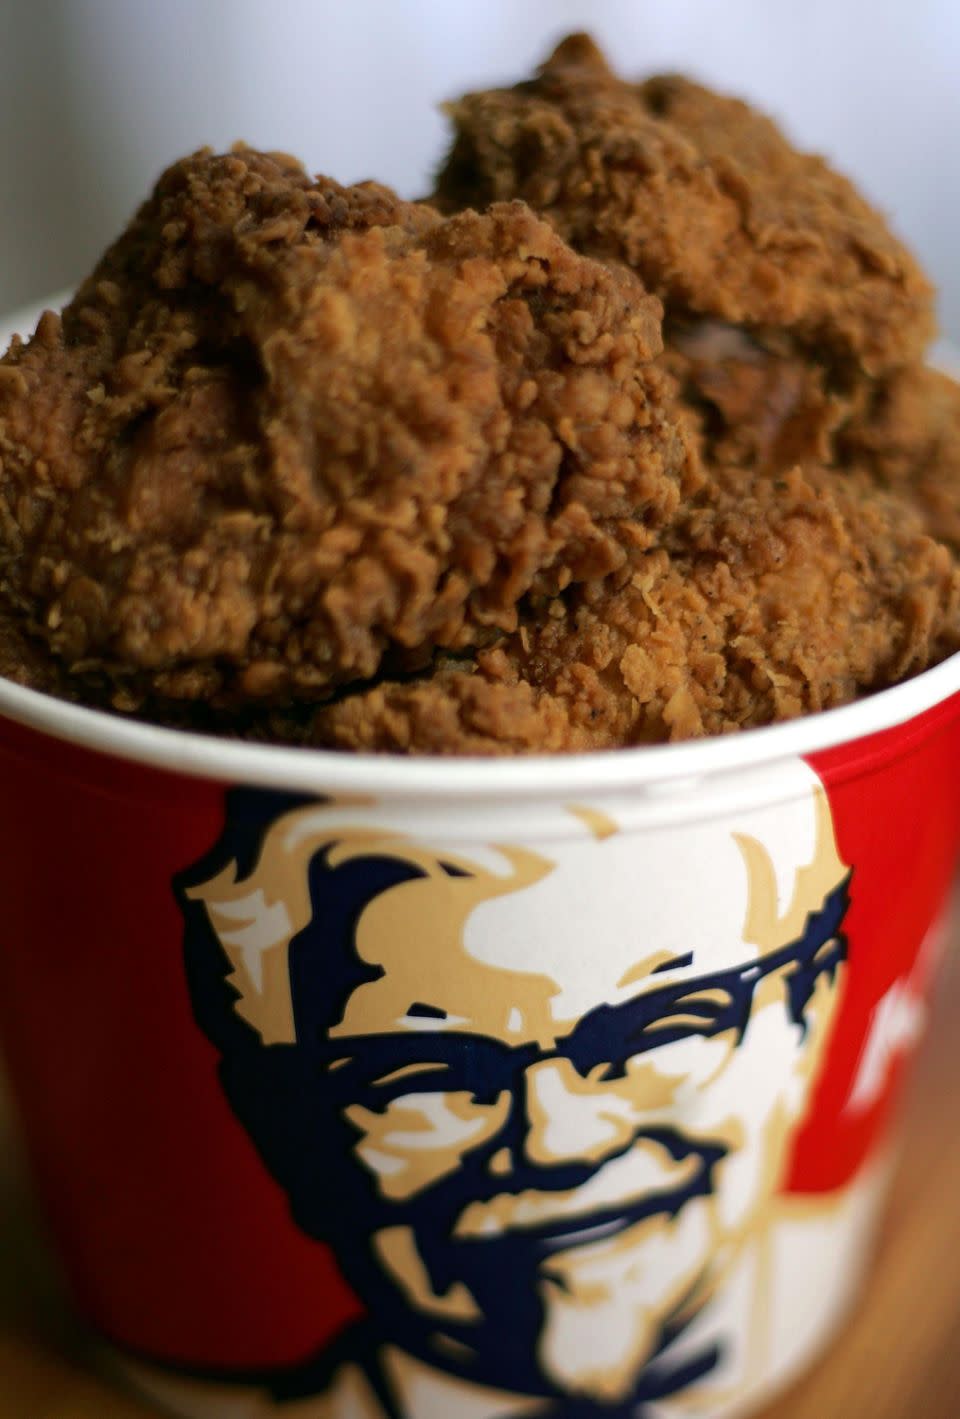 Forget chicken, it's all about how much soft drink you can fit in a KFC bucket. Photo: Getty